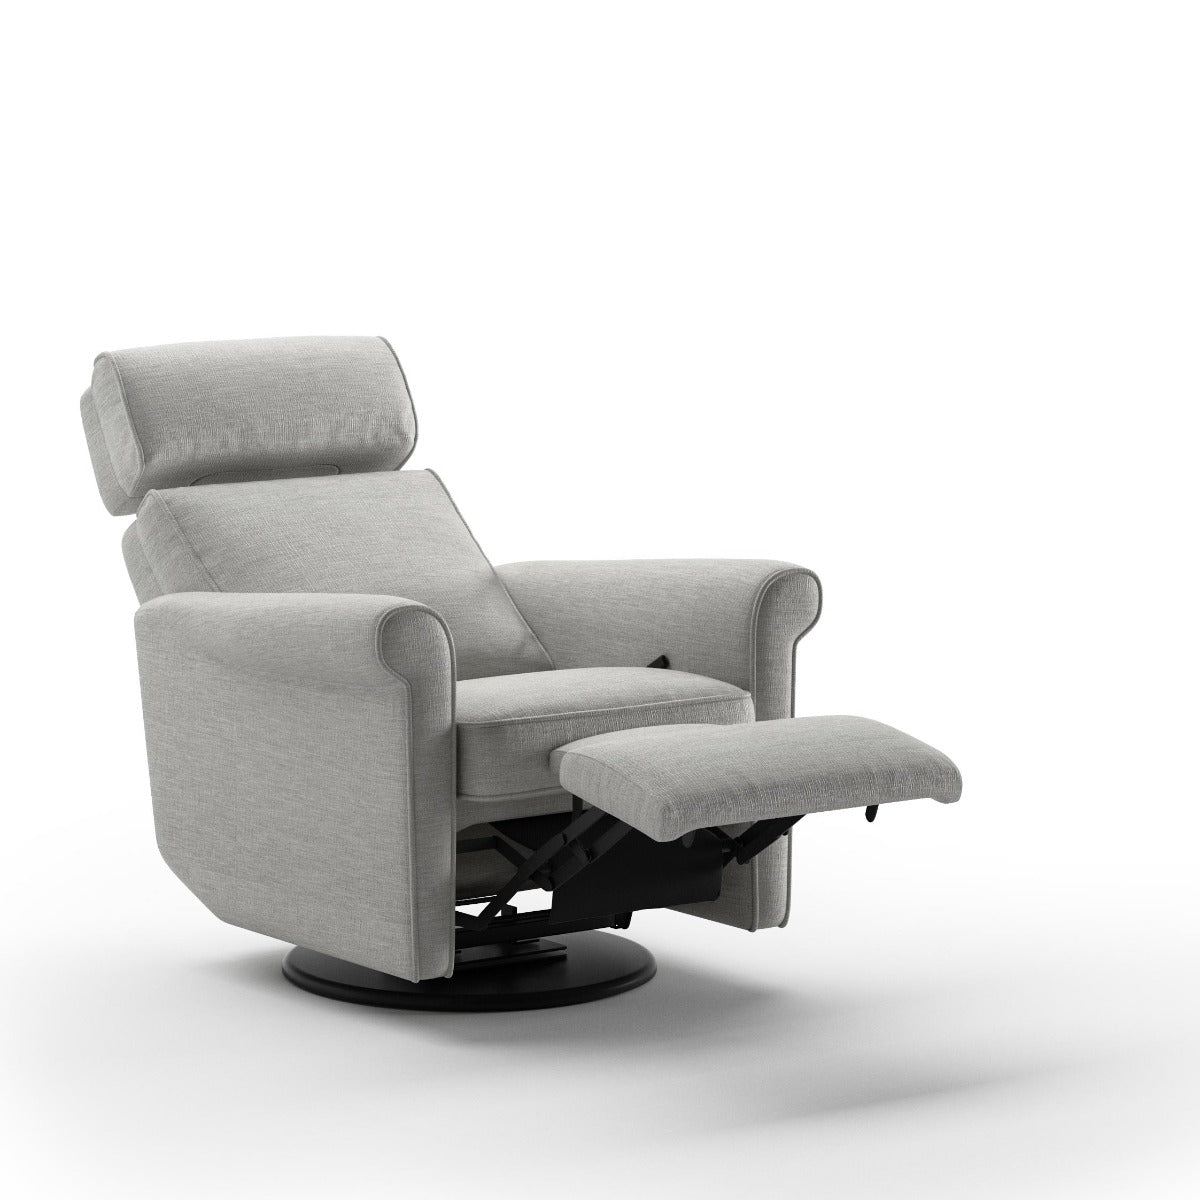 Luonto Furniture Rolled Recliner - Manual - Oliver 173